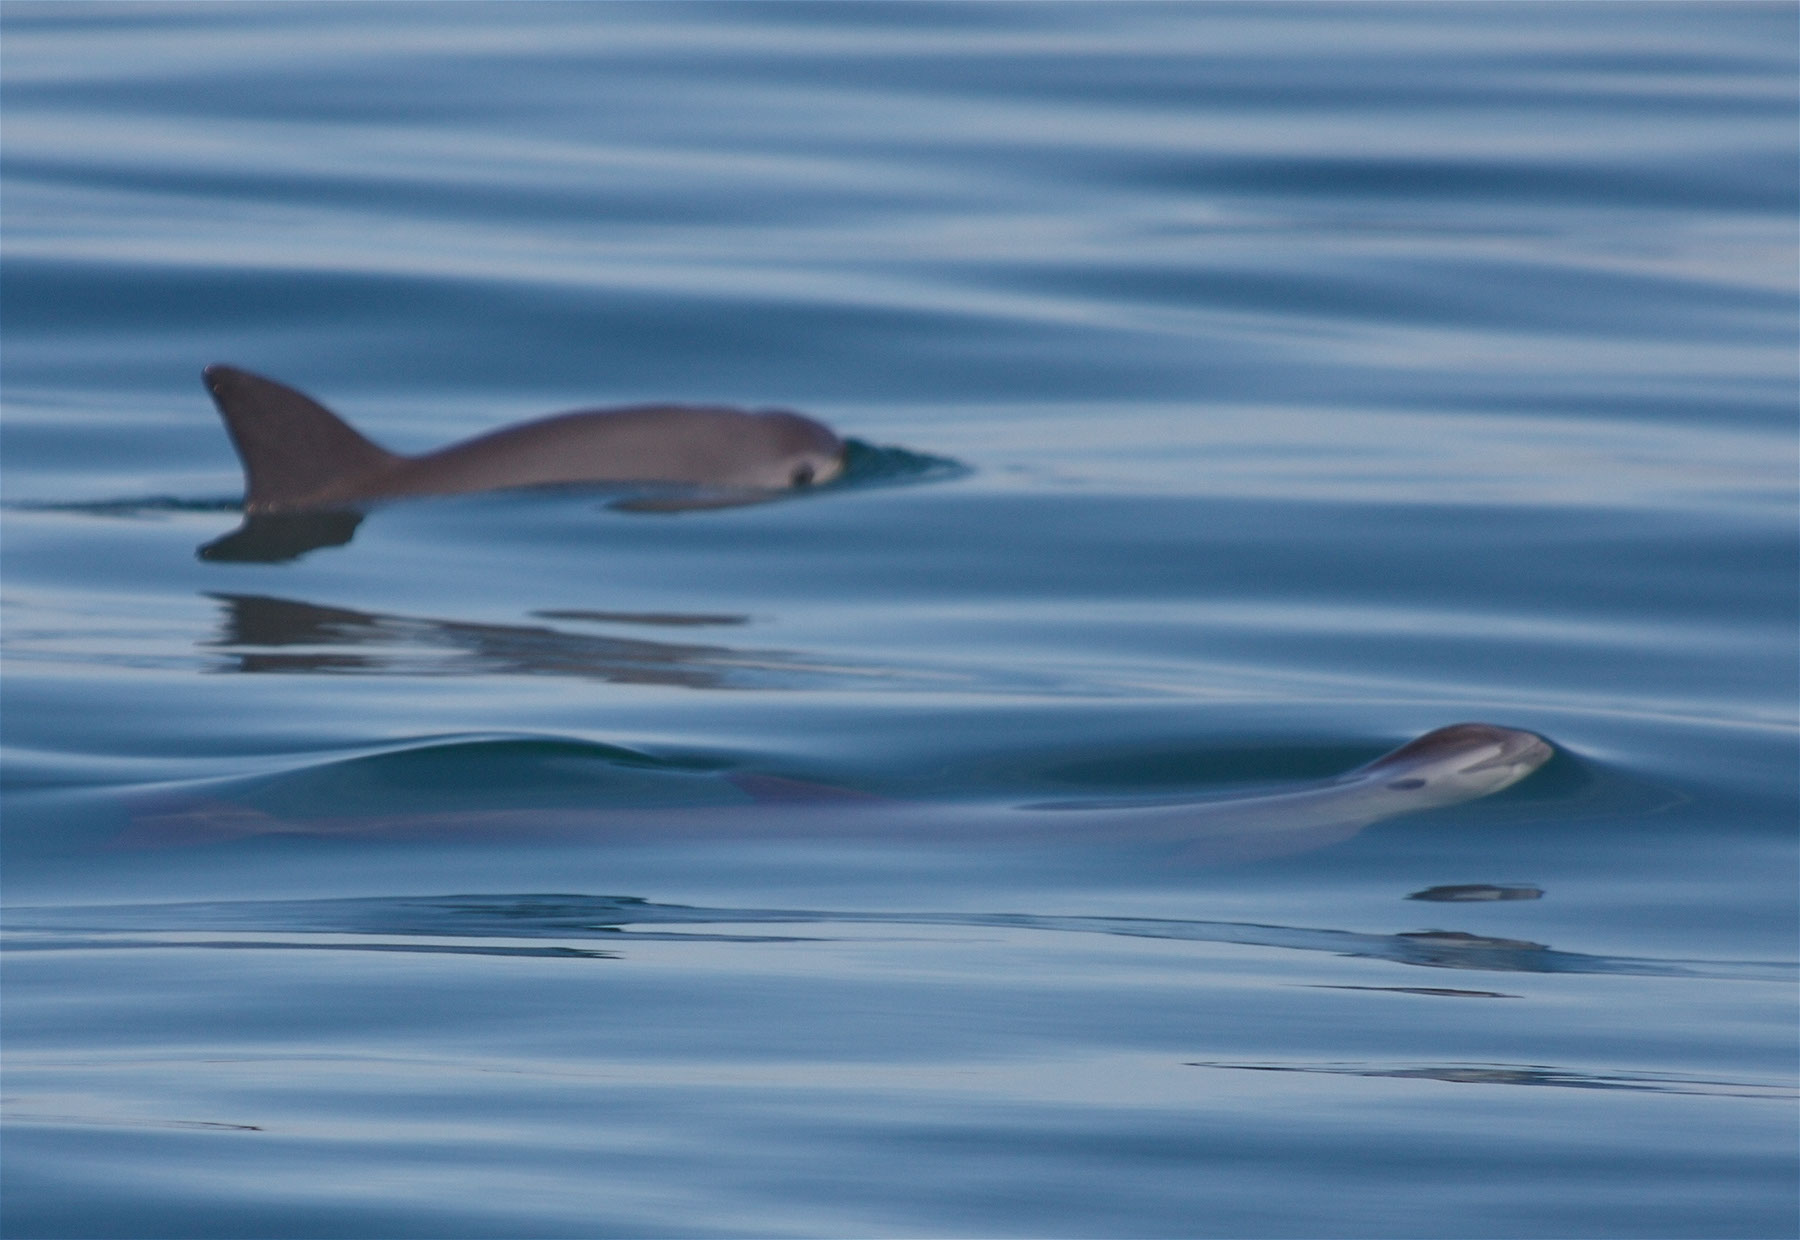 Lawsuit Targets Trump Administration’s Failure to Act to Save Vanishing Porpoises